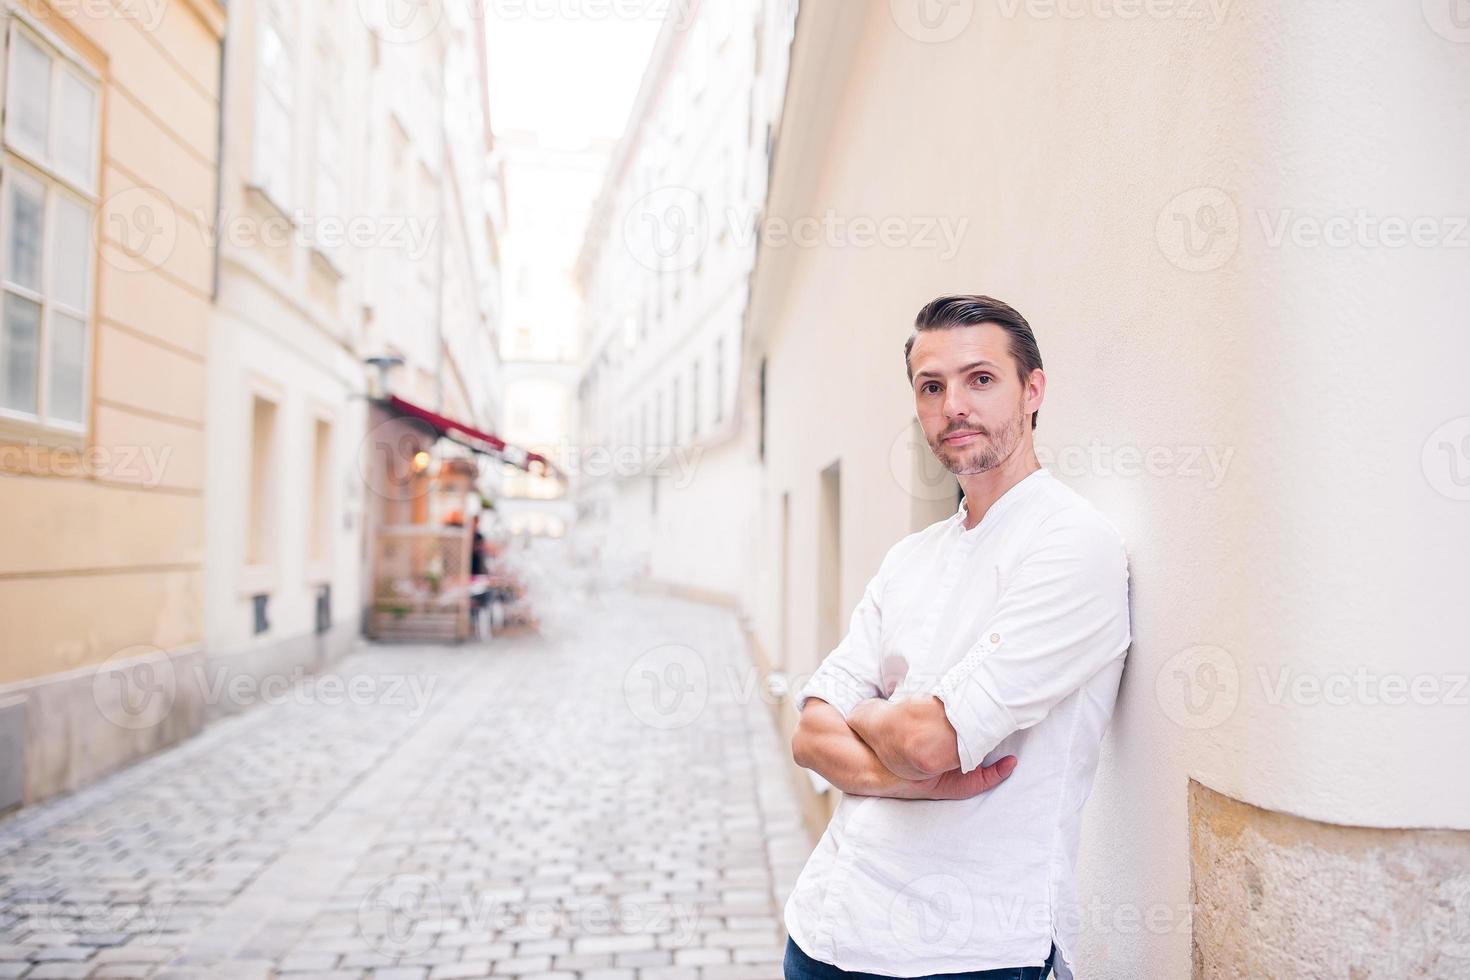 Young man background the old european city take selfie photo